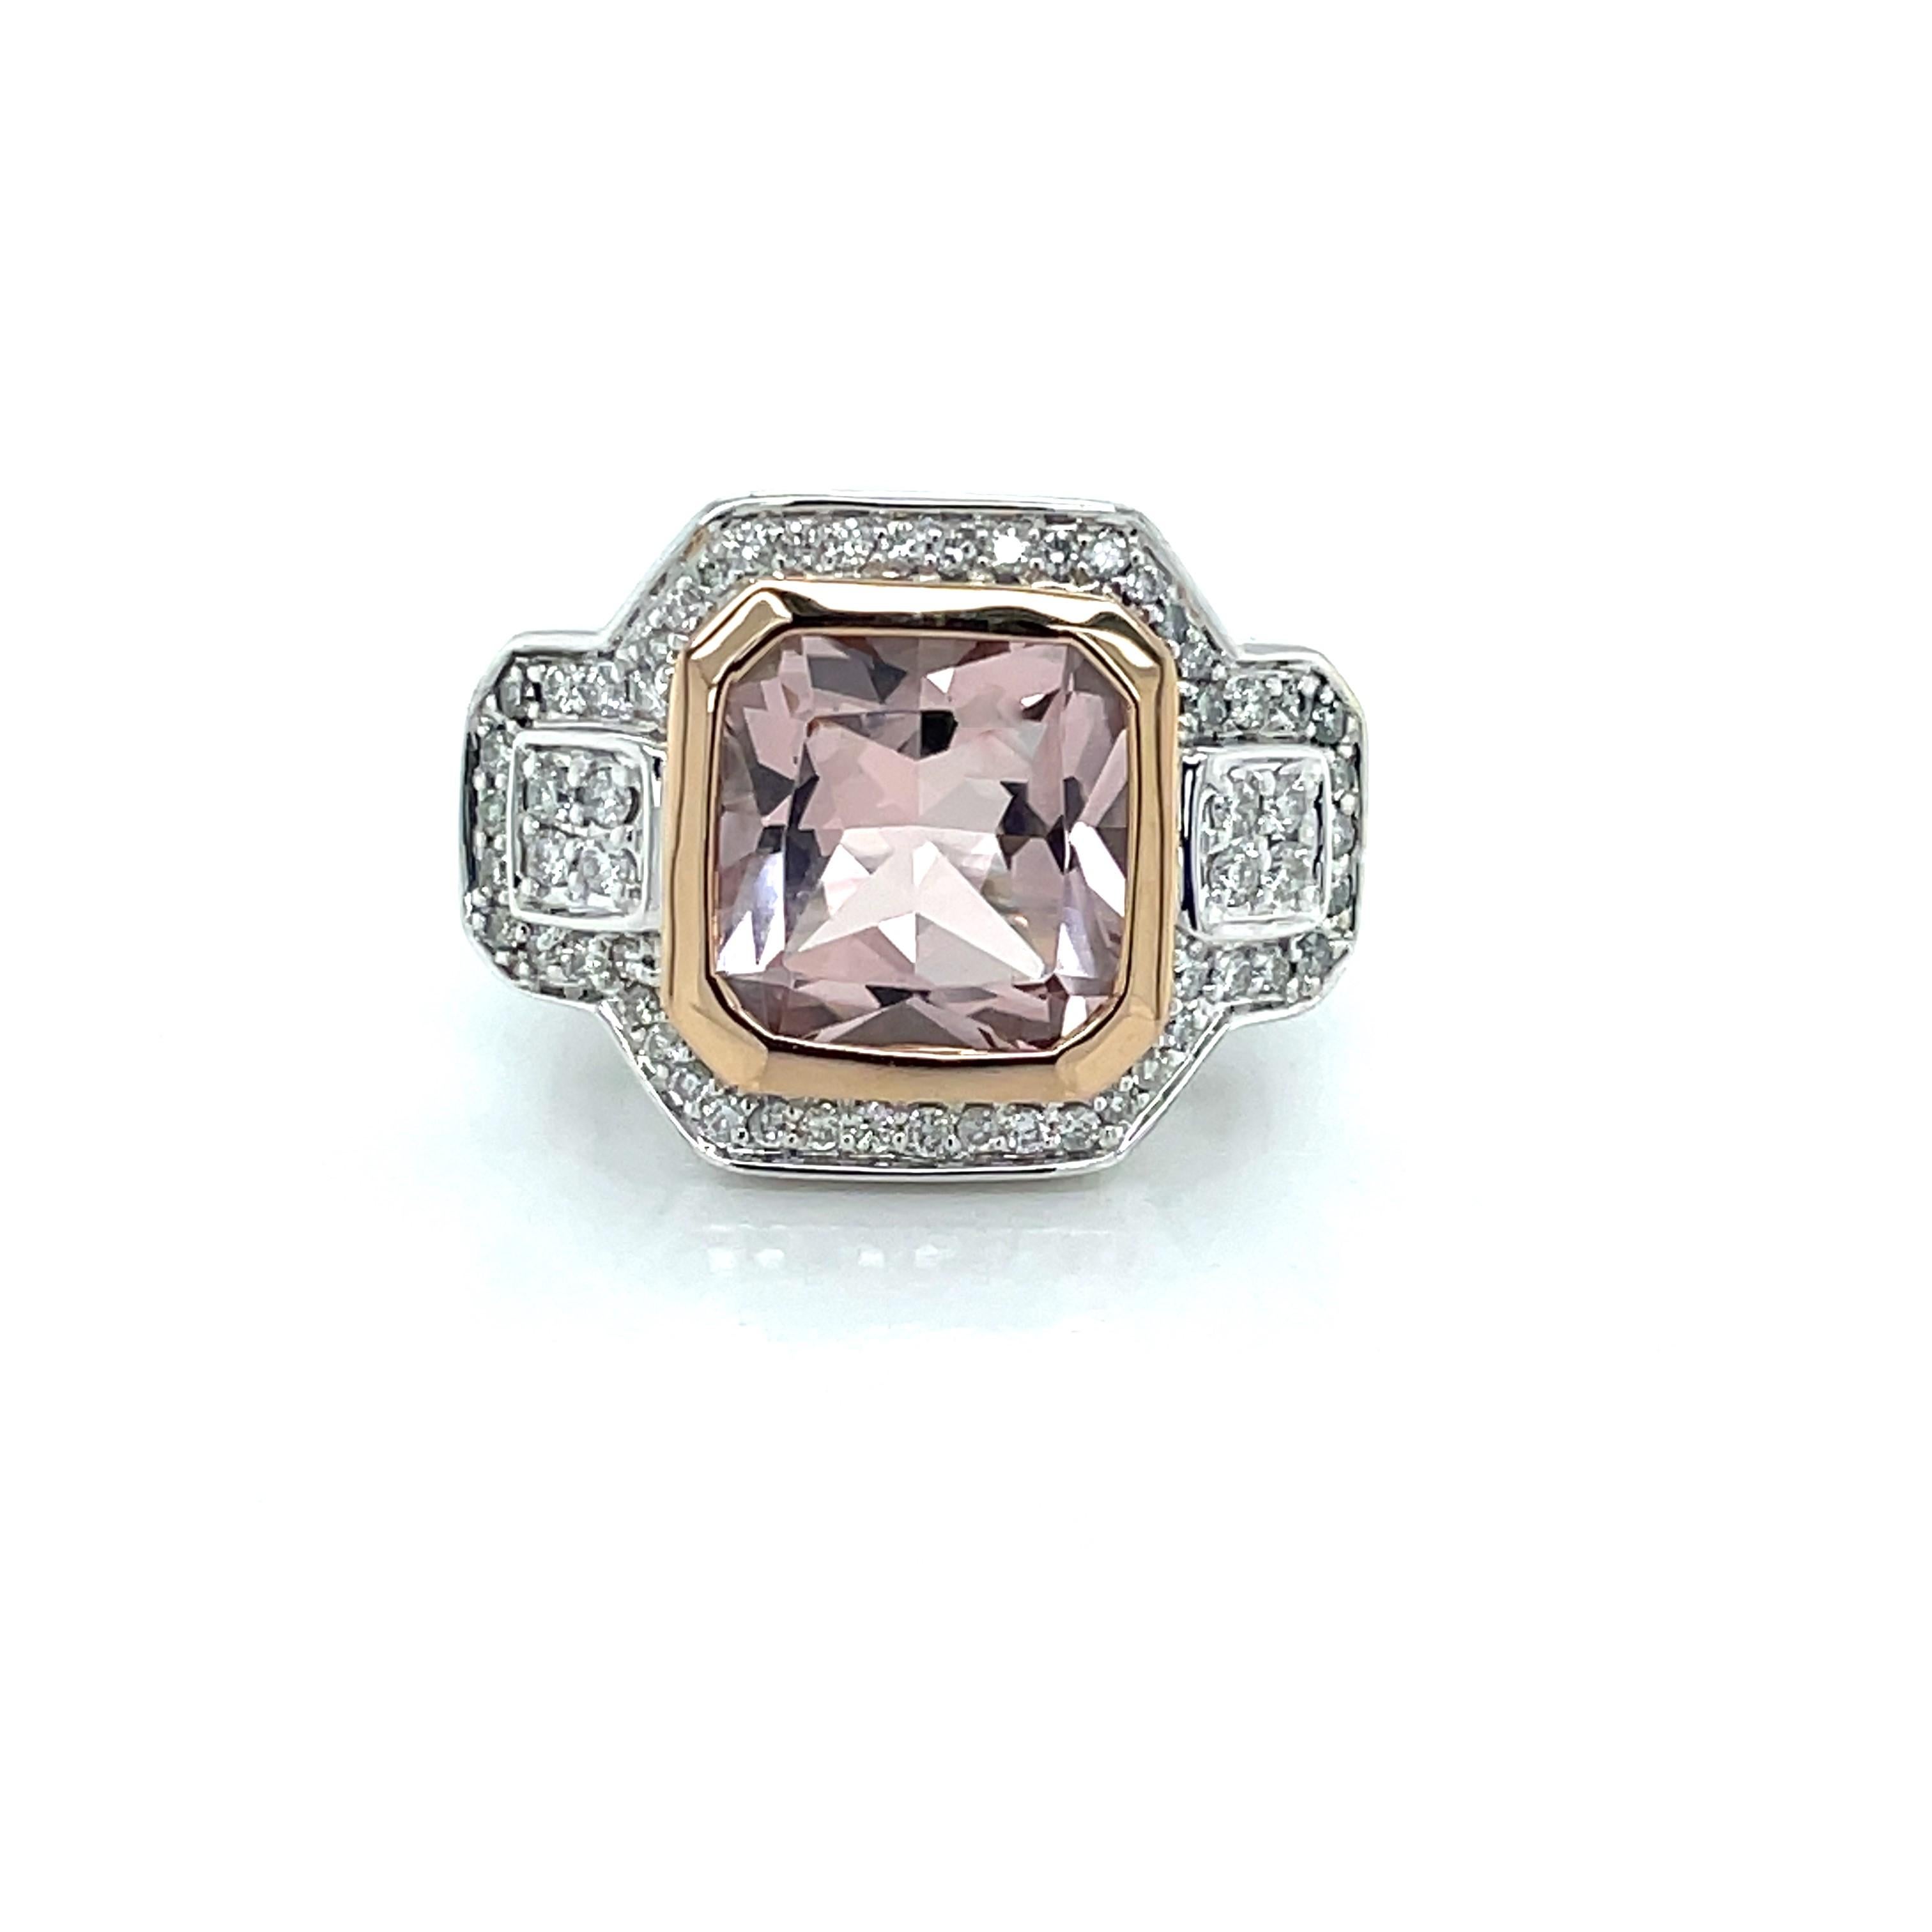 Sonia B 4.5 Carat Kunzite and Diamond 18 Karat White Gold Cocktail Ring In Excellent Condition For Sale In Mount Kisco, NY